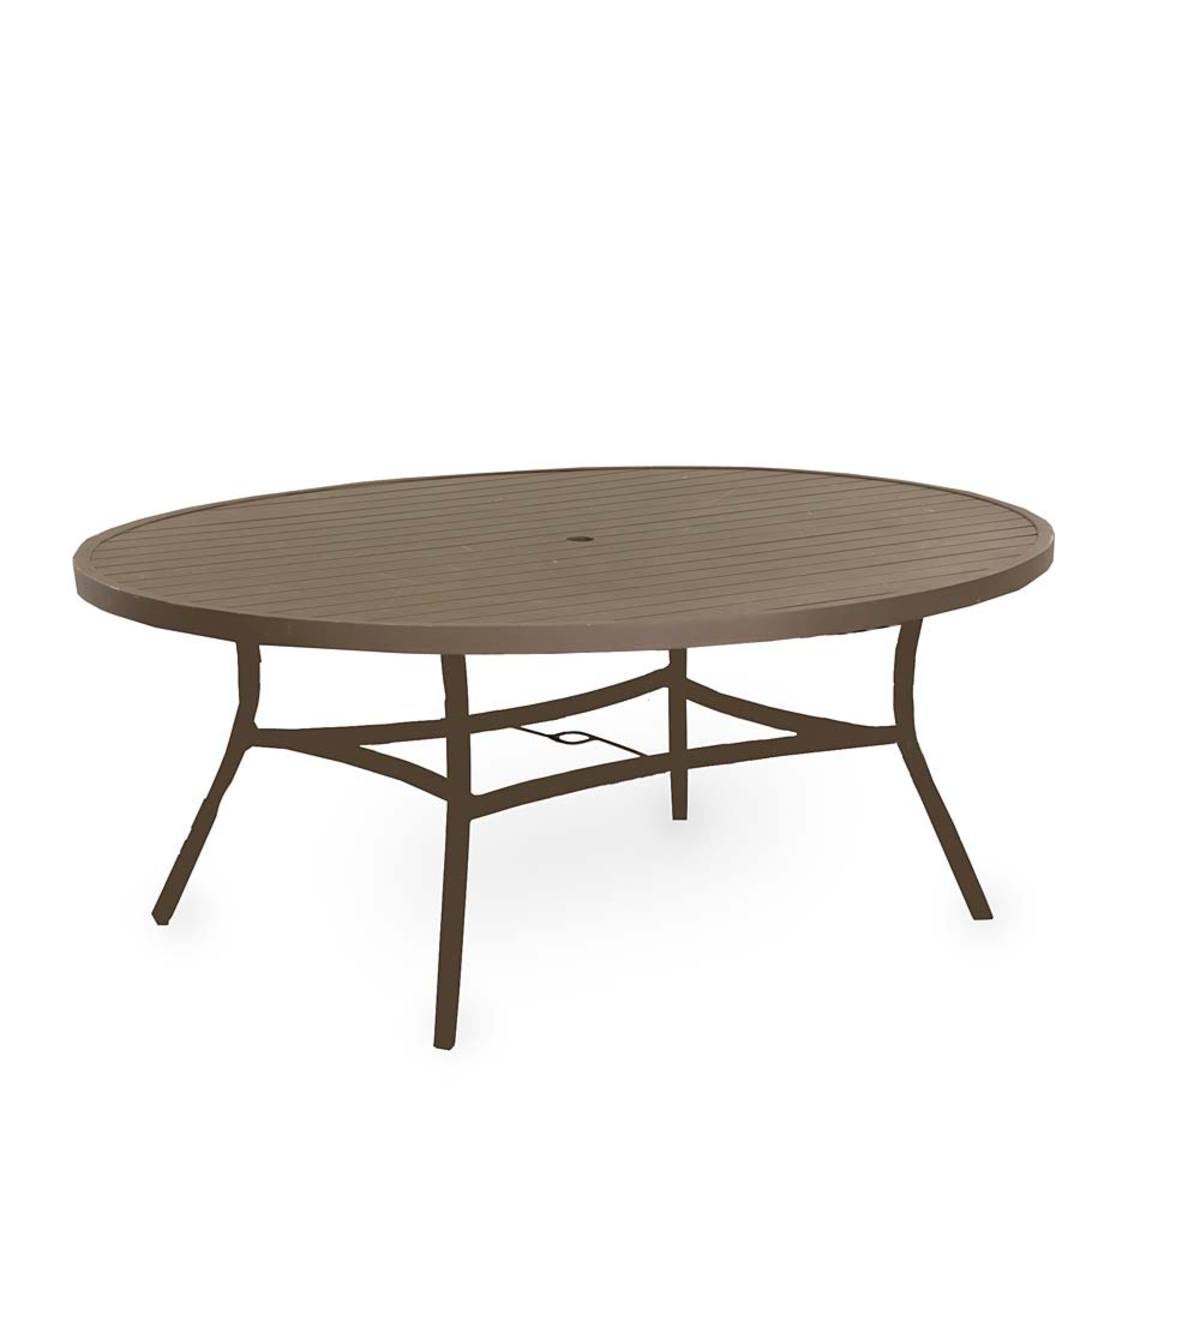 Topsail Oval Dining Table